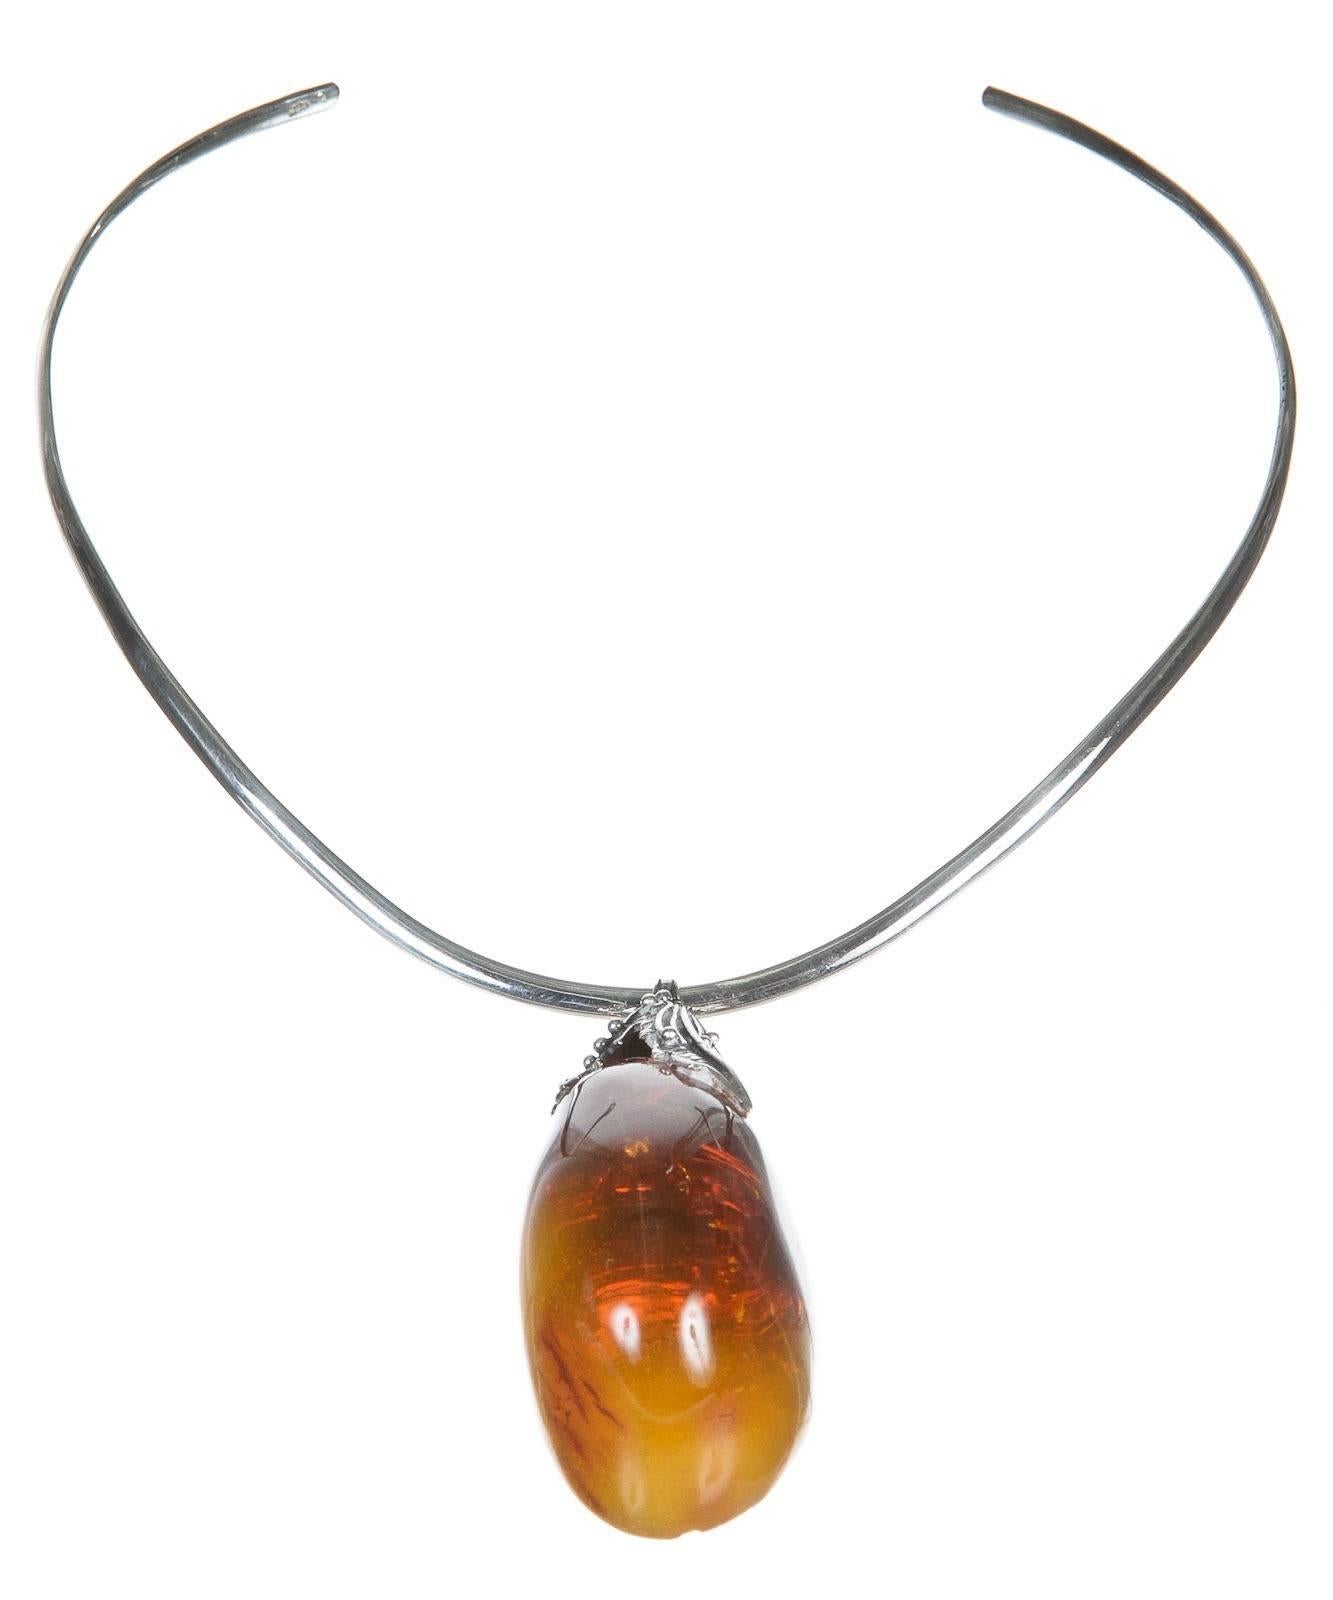 Straight from the House of Amber, this necklace can easily be yours today. This choker necklace sits nicely at the top of the neck. A beautiful crafted piece of amber hangs down with style and grace.

    100% Authentic
    Material: Silver and